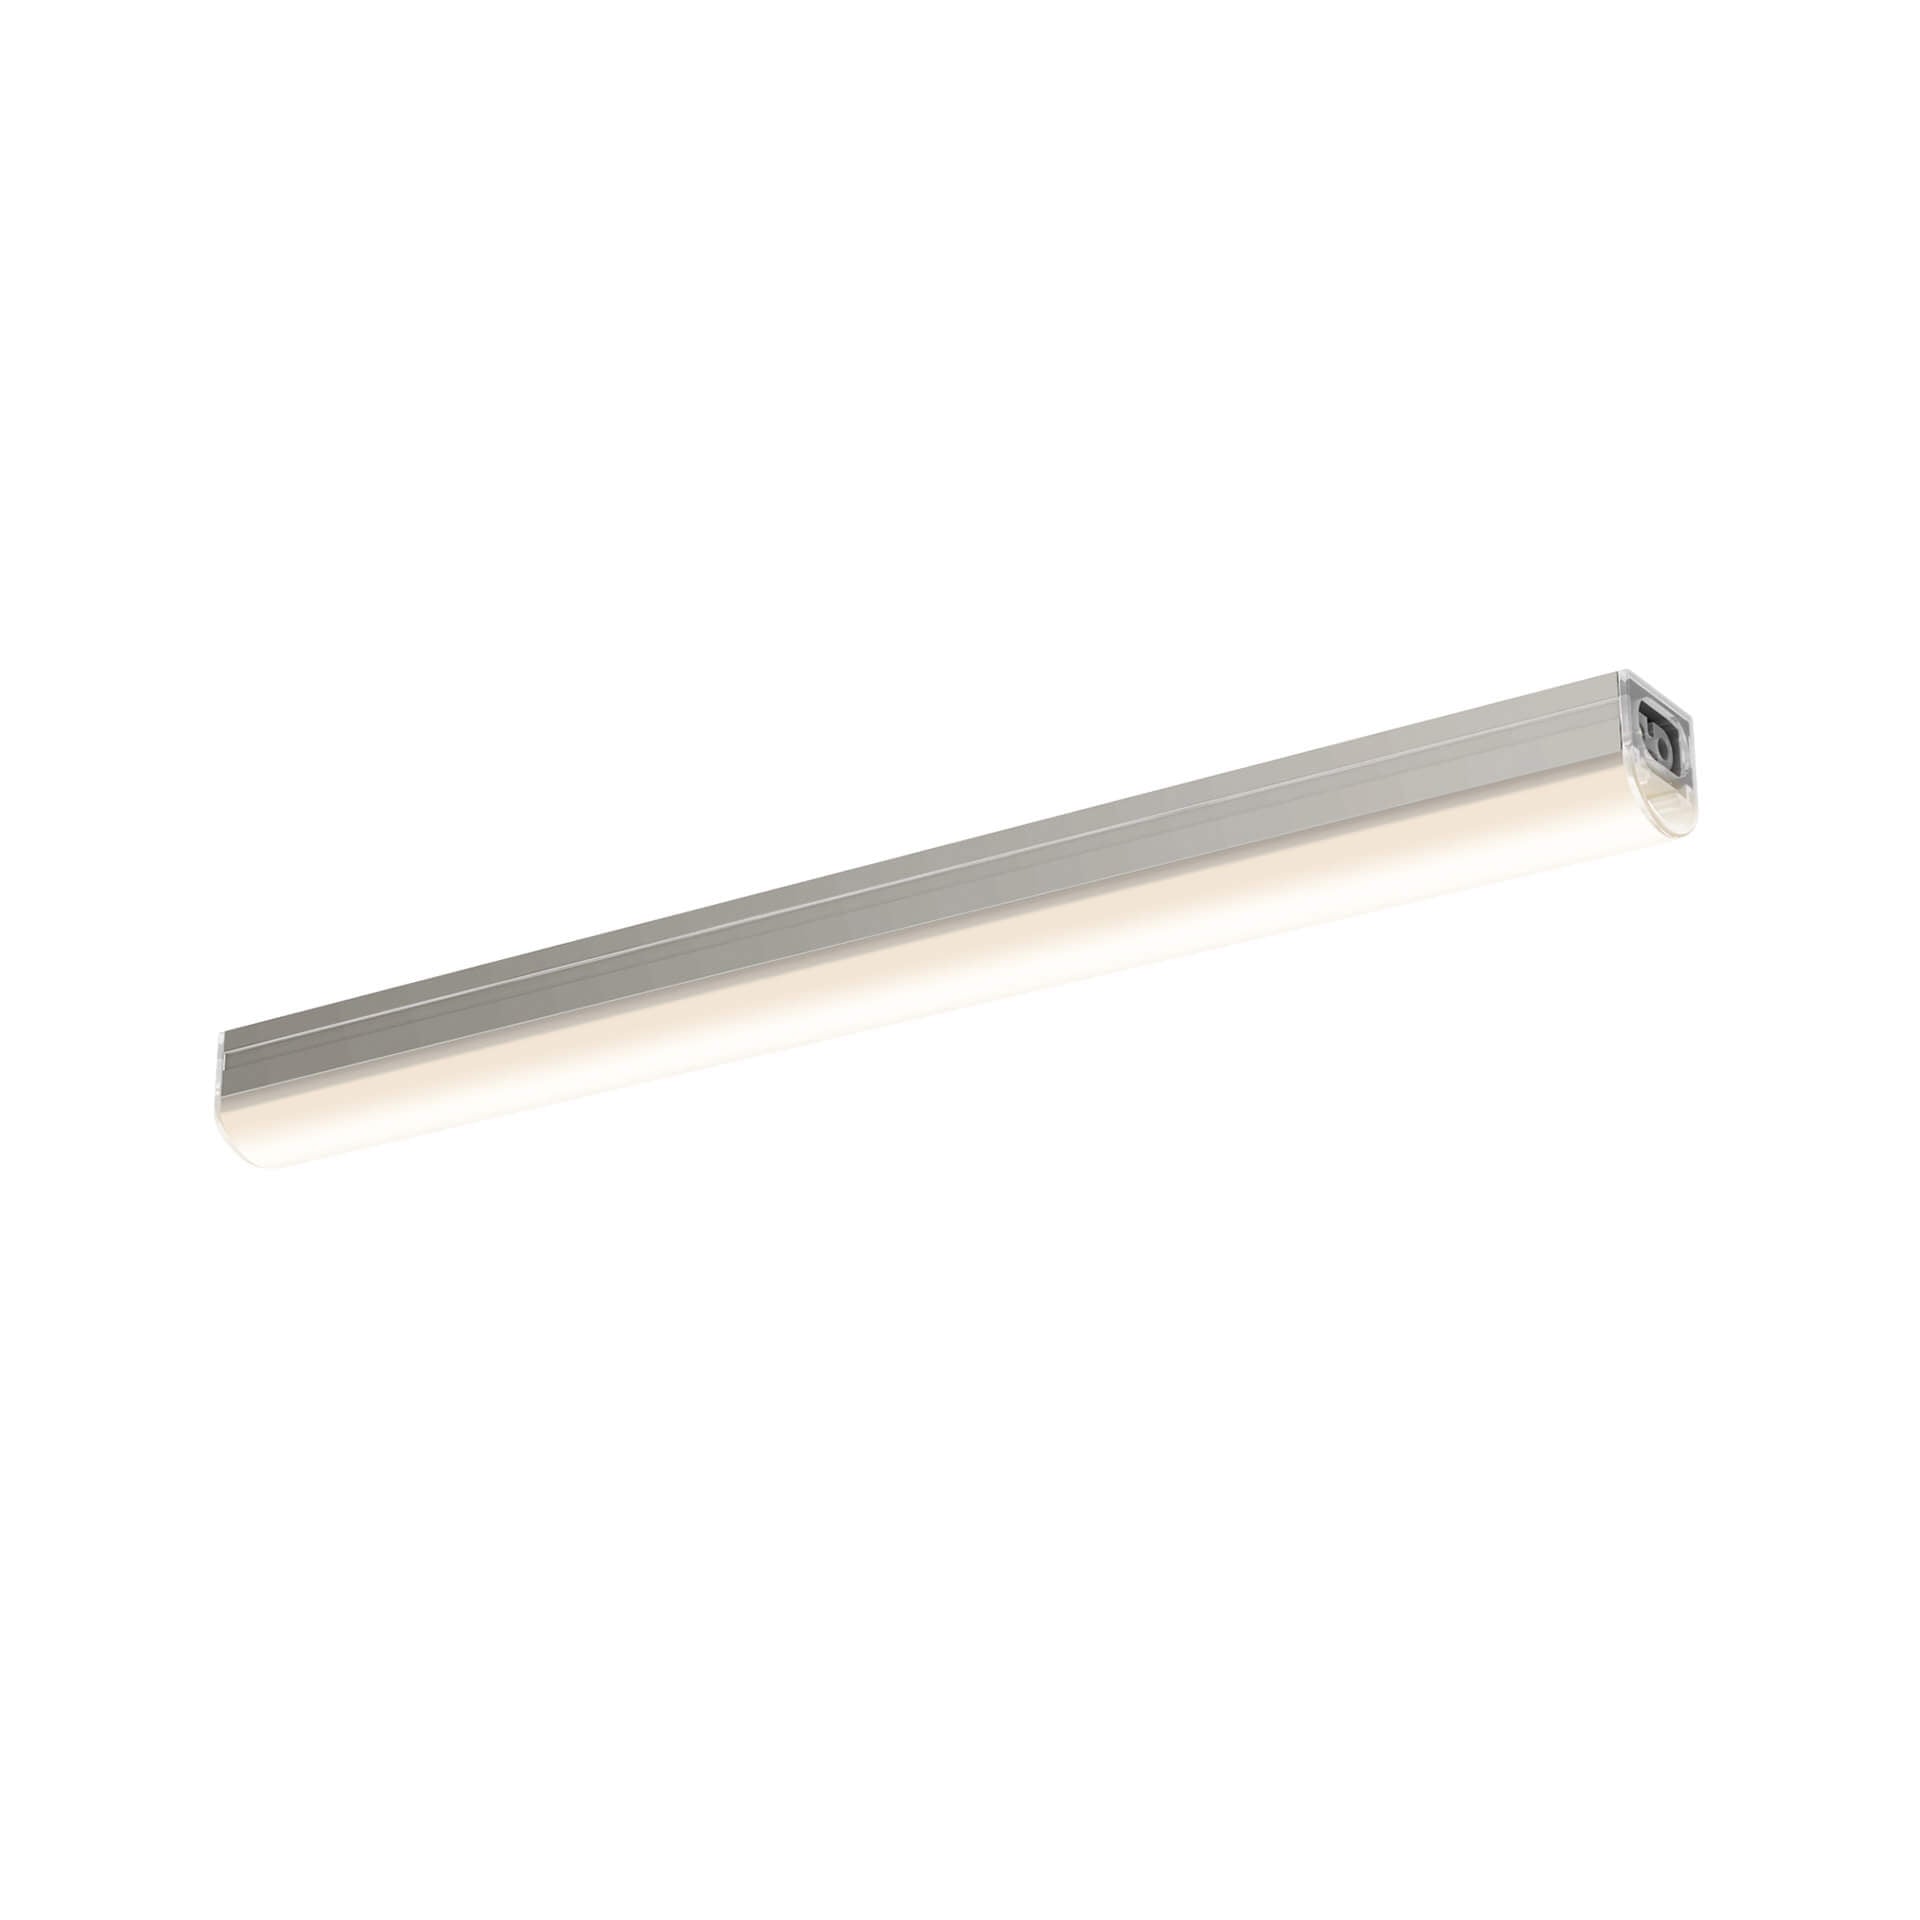 Cct Powerled Linear Under Cabinet Light